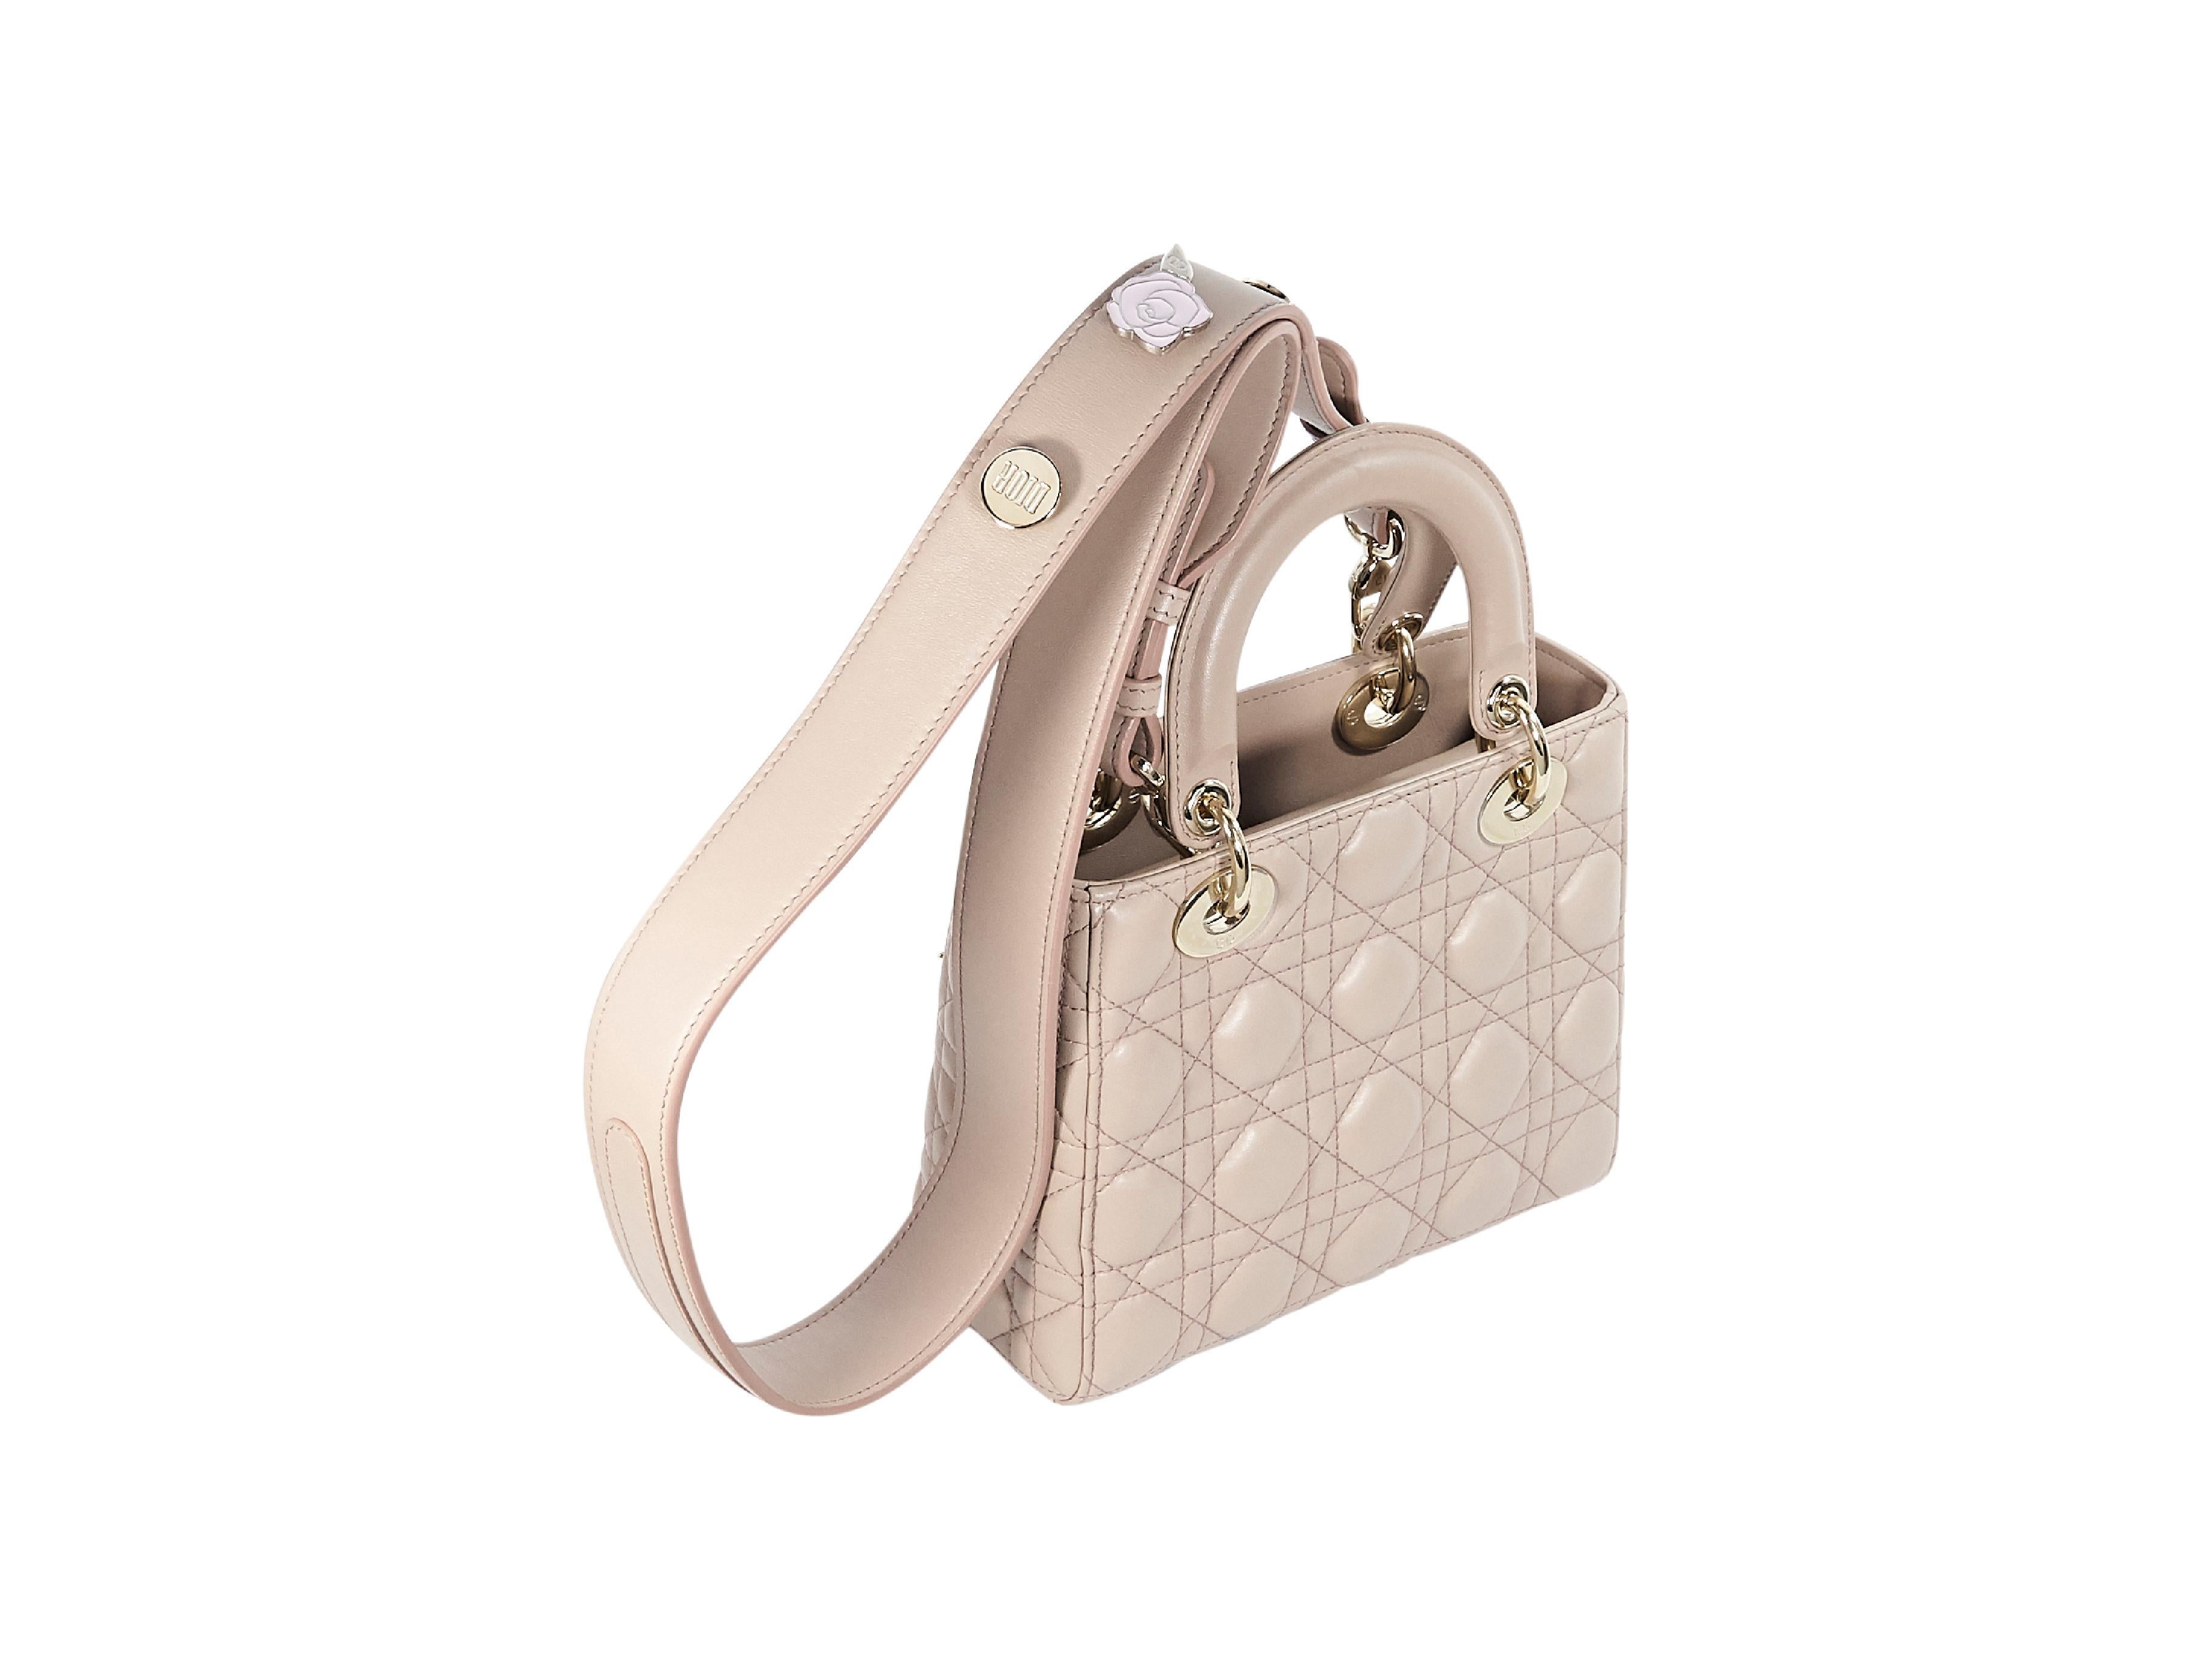 Product details:  Beige quilted leather Lady Dior mini satchel bag by Christian Dior.  Dual carry handles.  Detachable shoulder strap.  Top flap closure.  Lined interior with inner zip pocket.  Protective metal feet.  Goldtone hardware.  7.5